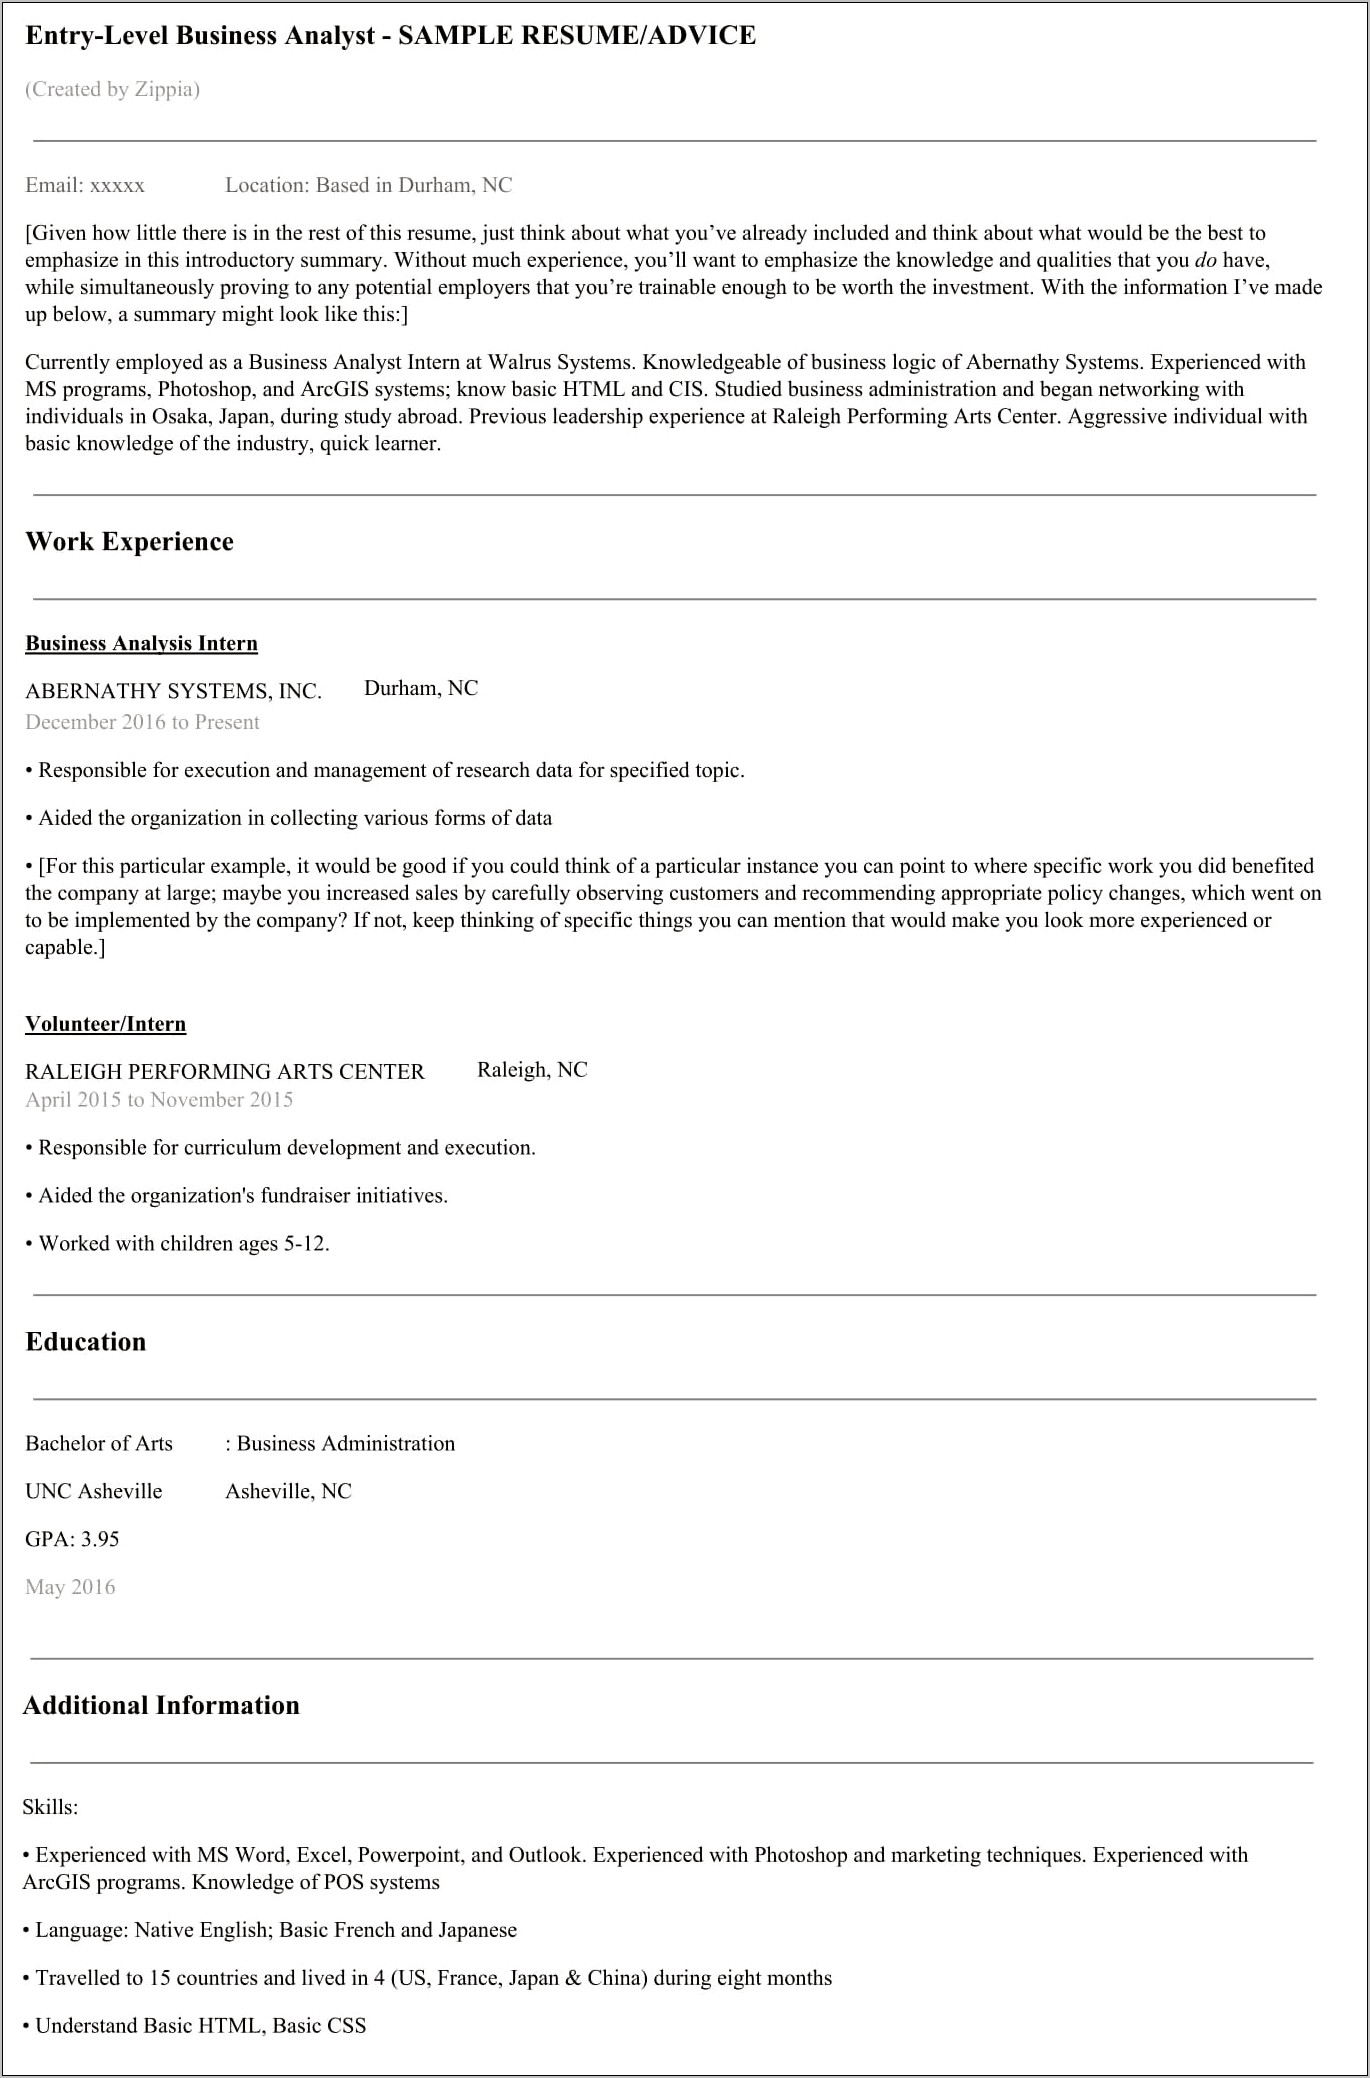 Sample Resume For Experienced Business Analyst Download